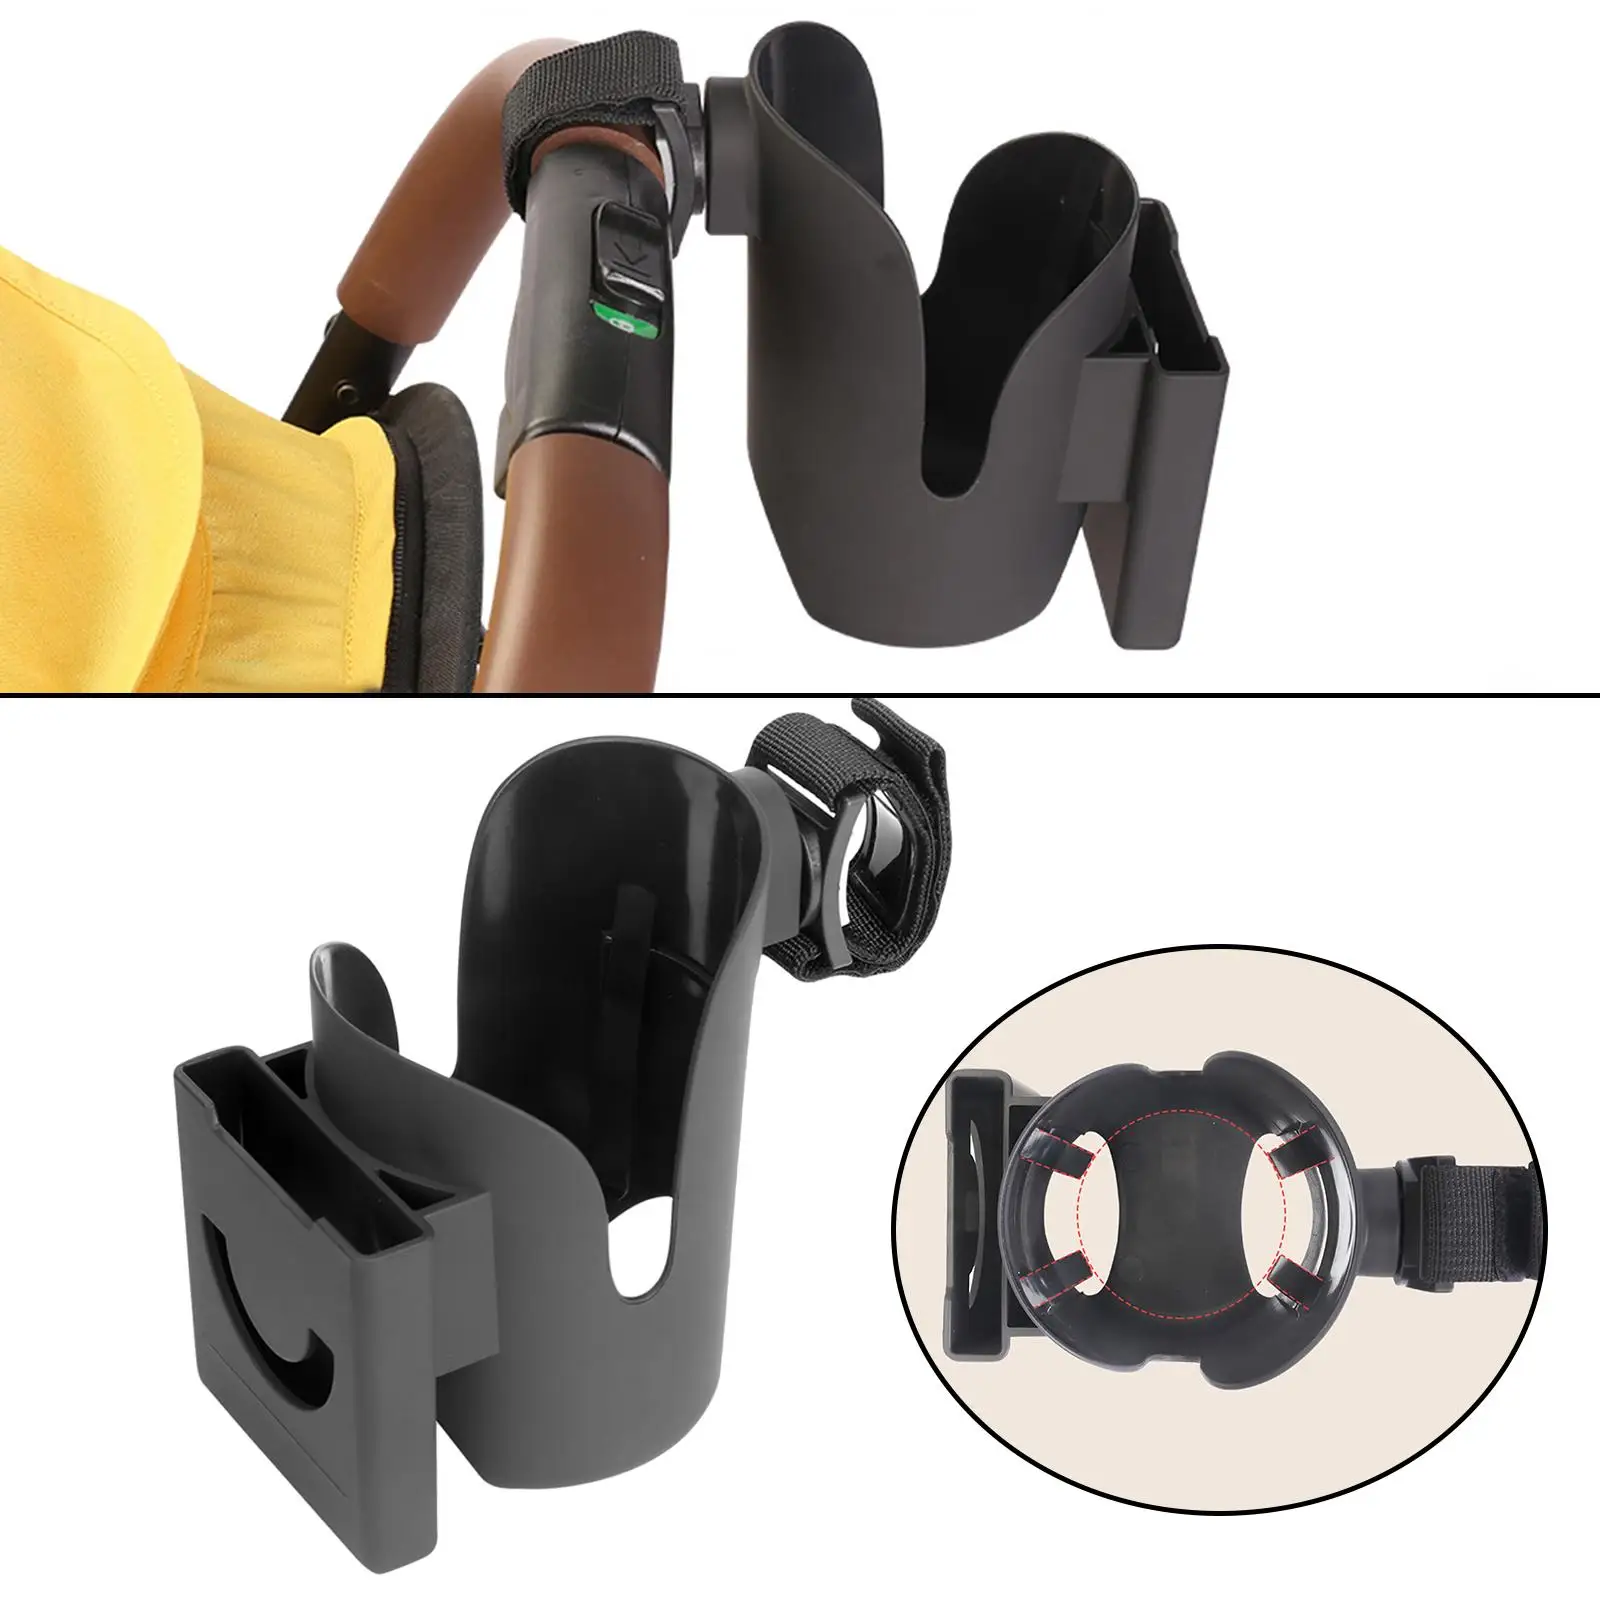 Stroller Cup Holder Attachment Large Caliber Fits Most Cups Storage Rack for Bike Scooter Walker Pushchair Accessories